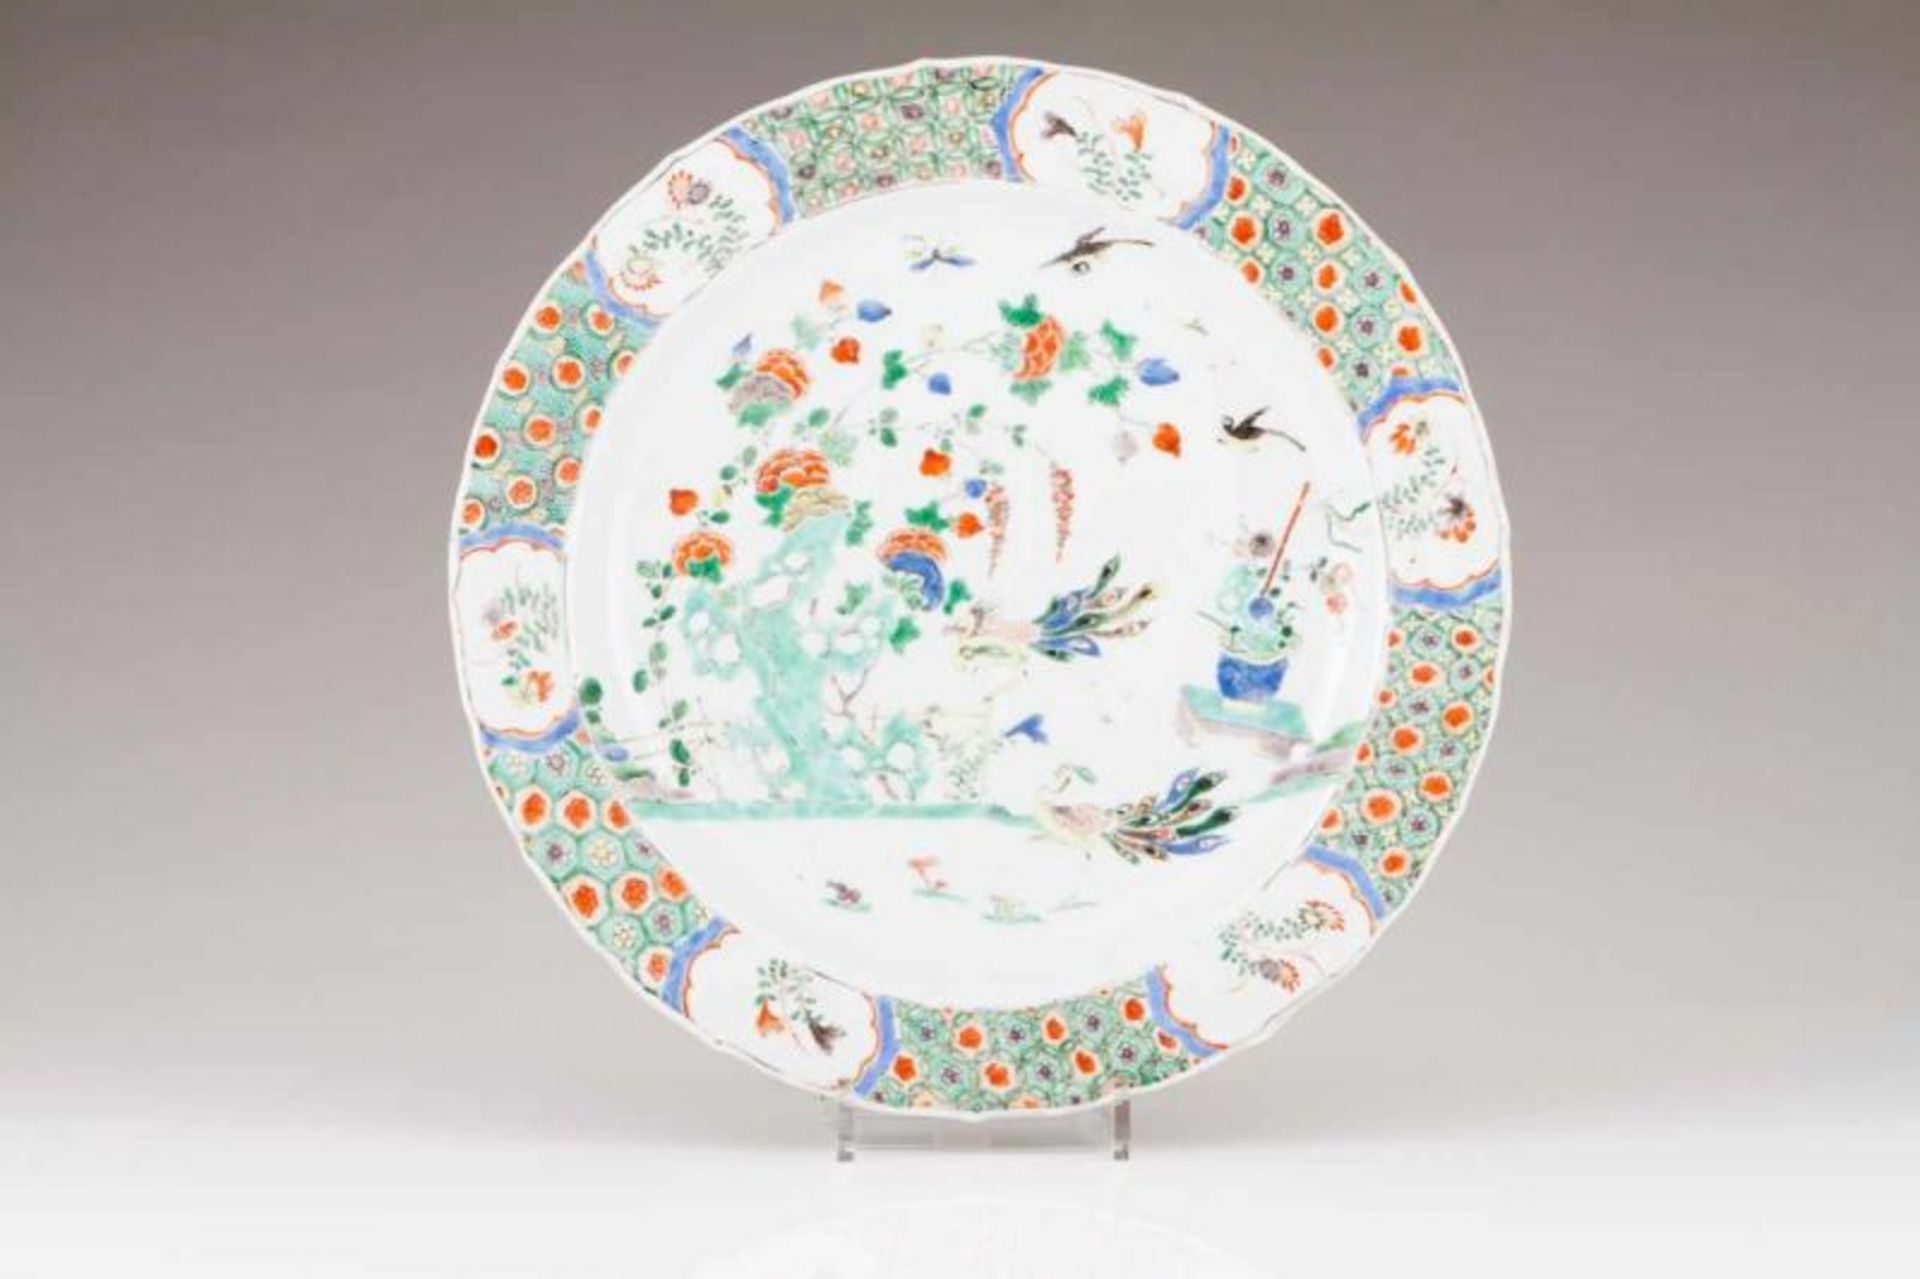 A scalloped charger Chinese porcelain Polcyhrome Famille Verte decoration depicting garden view